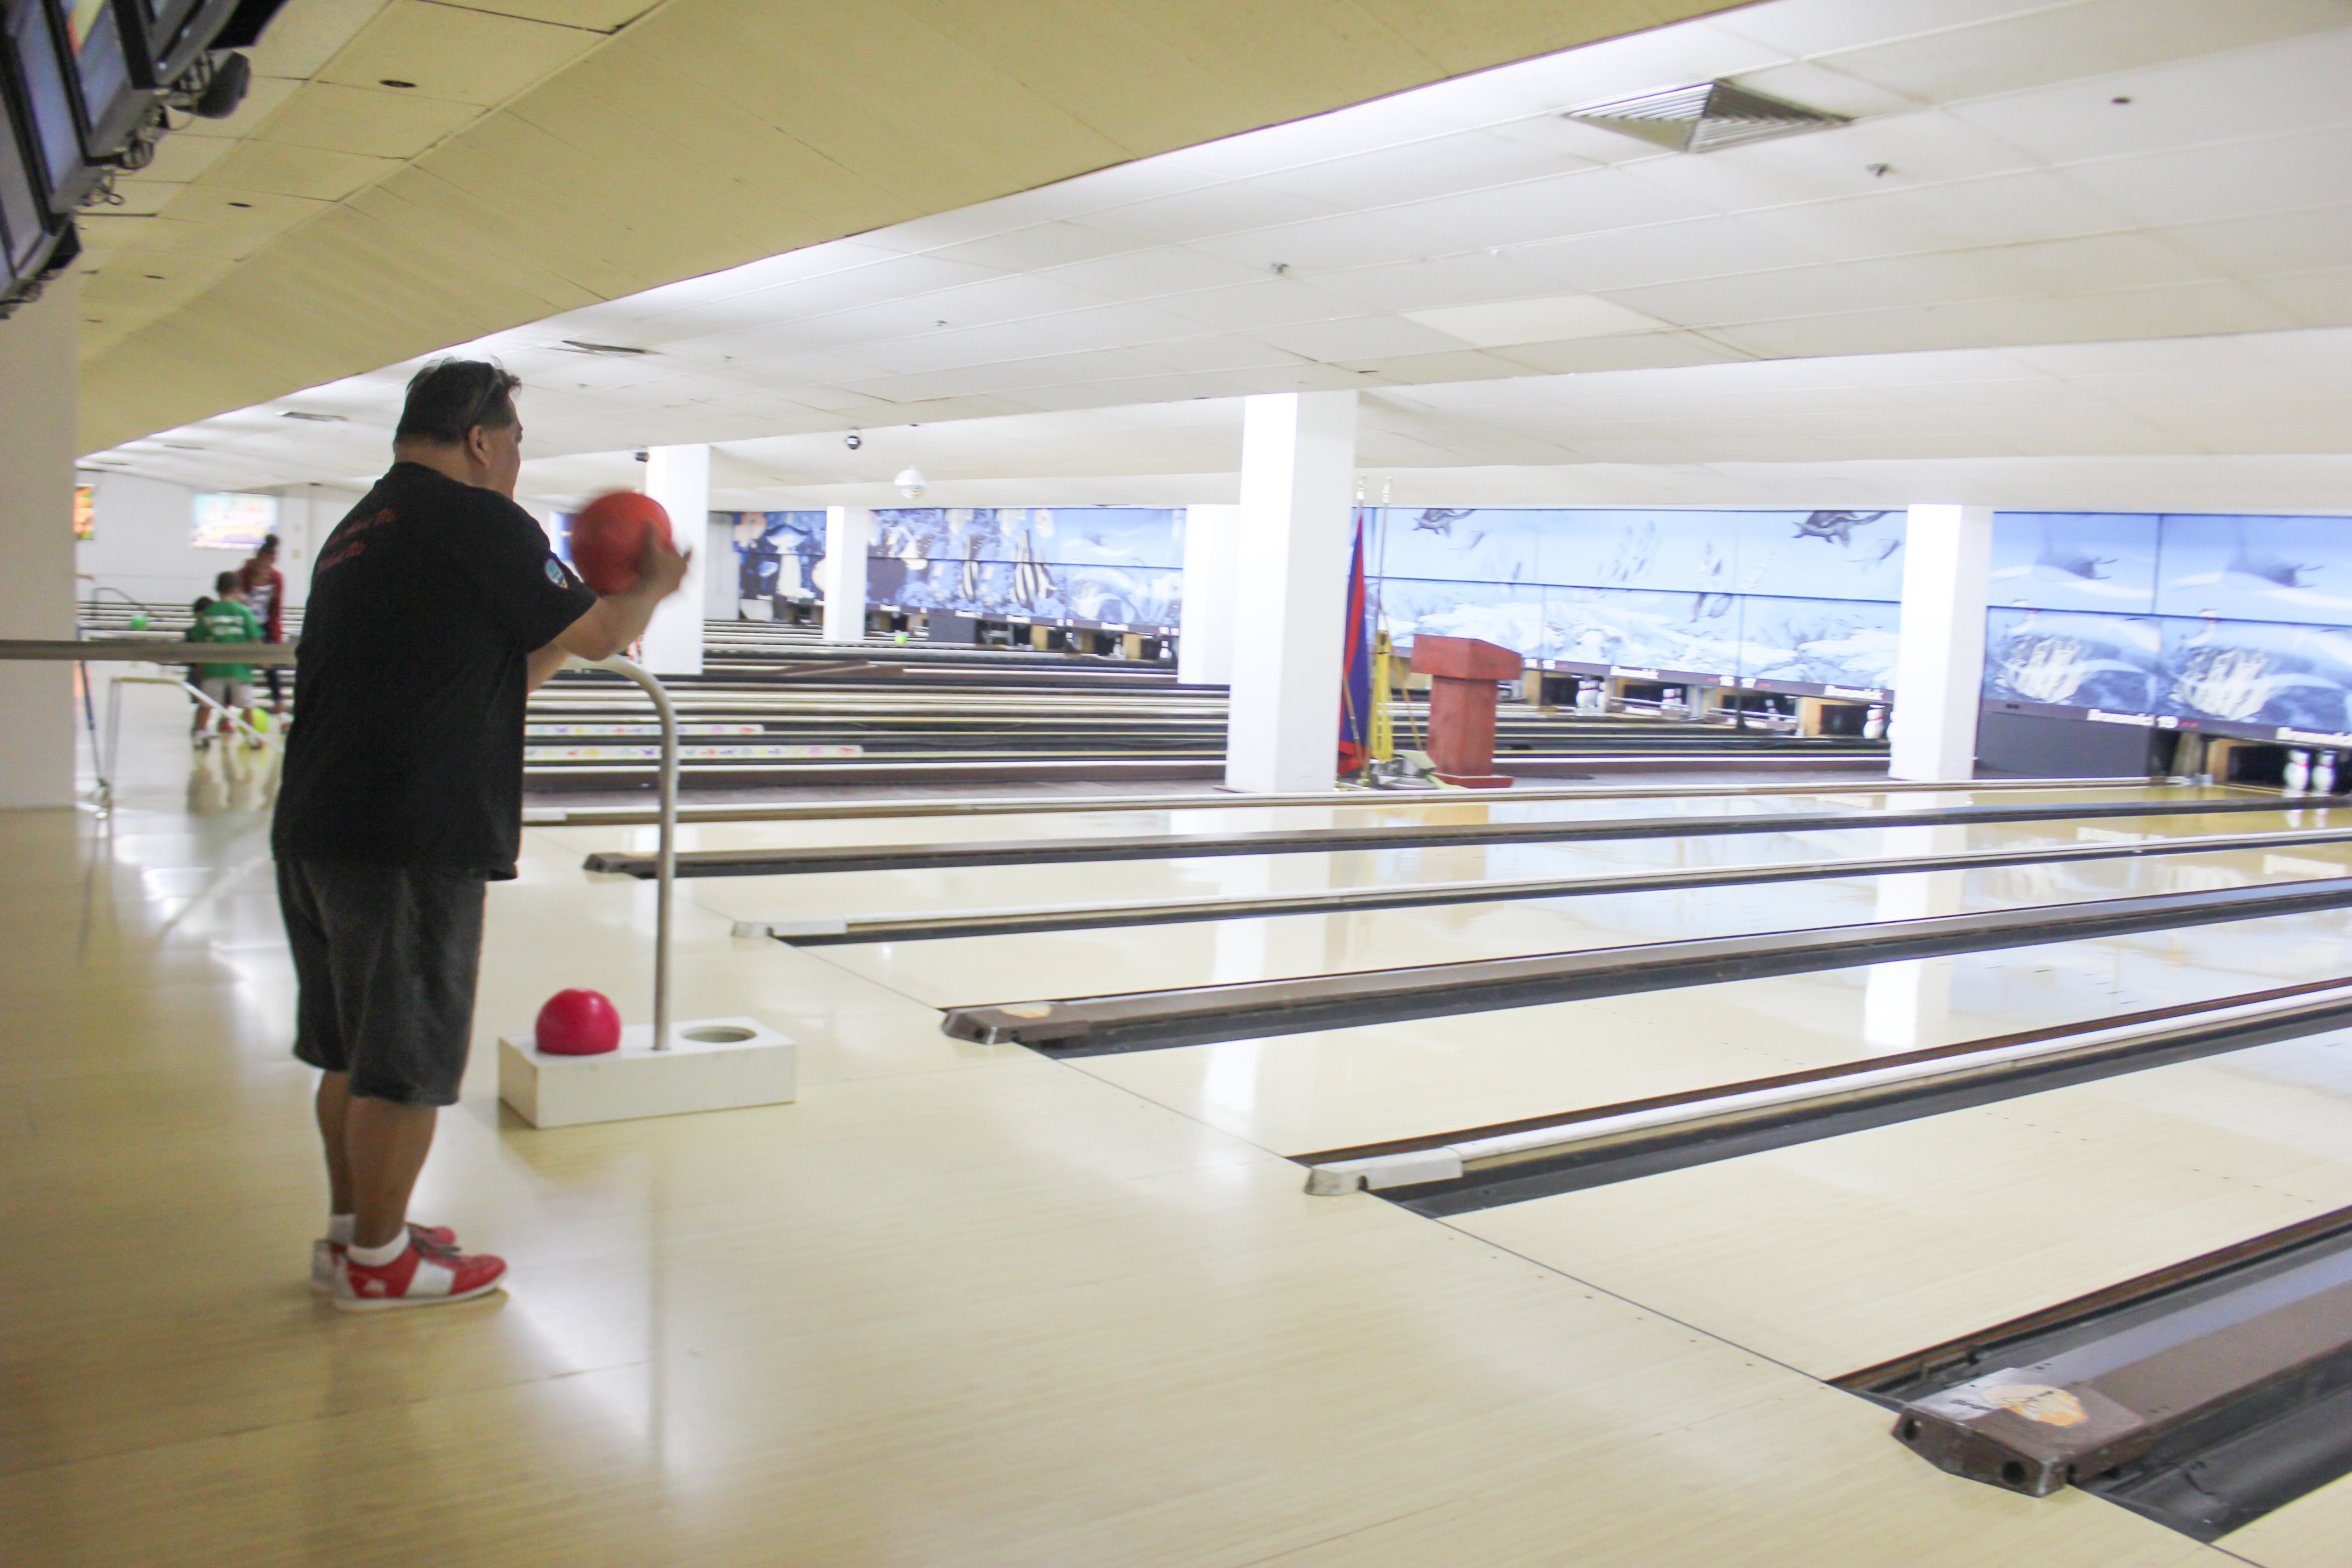 Andrew Tydingco (left), SiñA representative, focuses on a strike during the Bowling Bash.